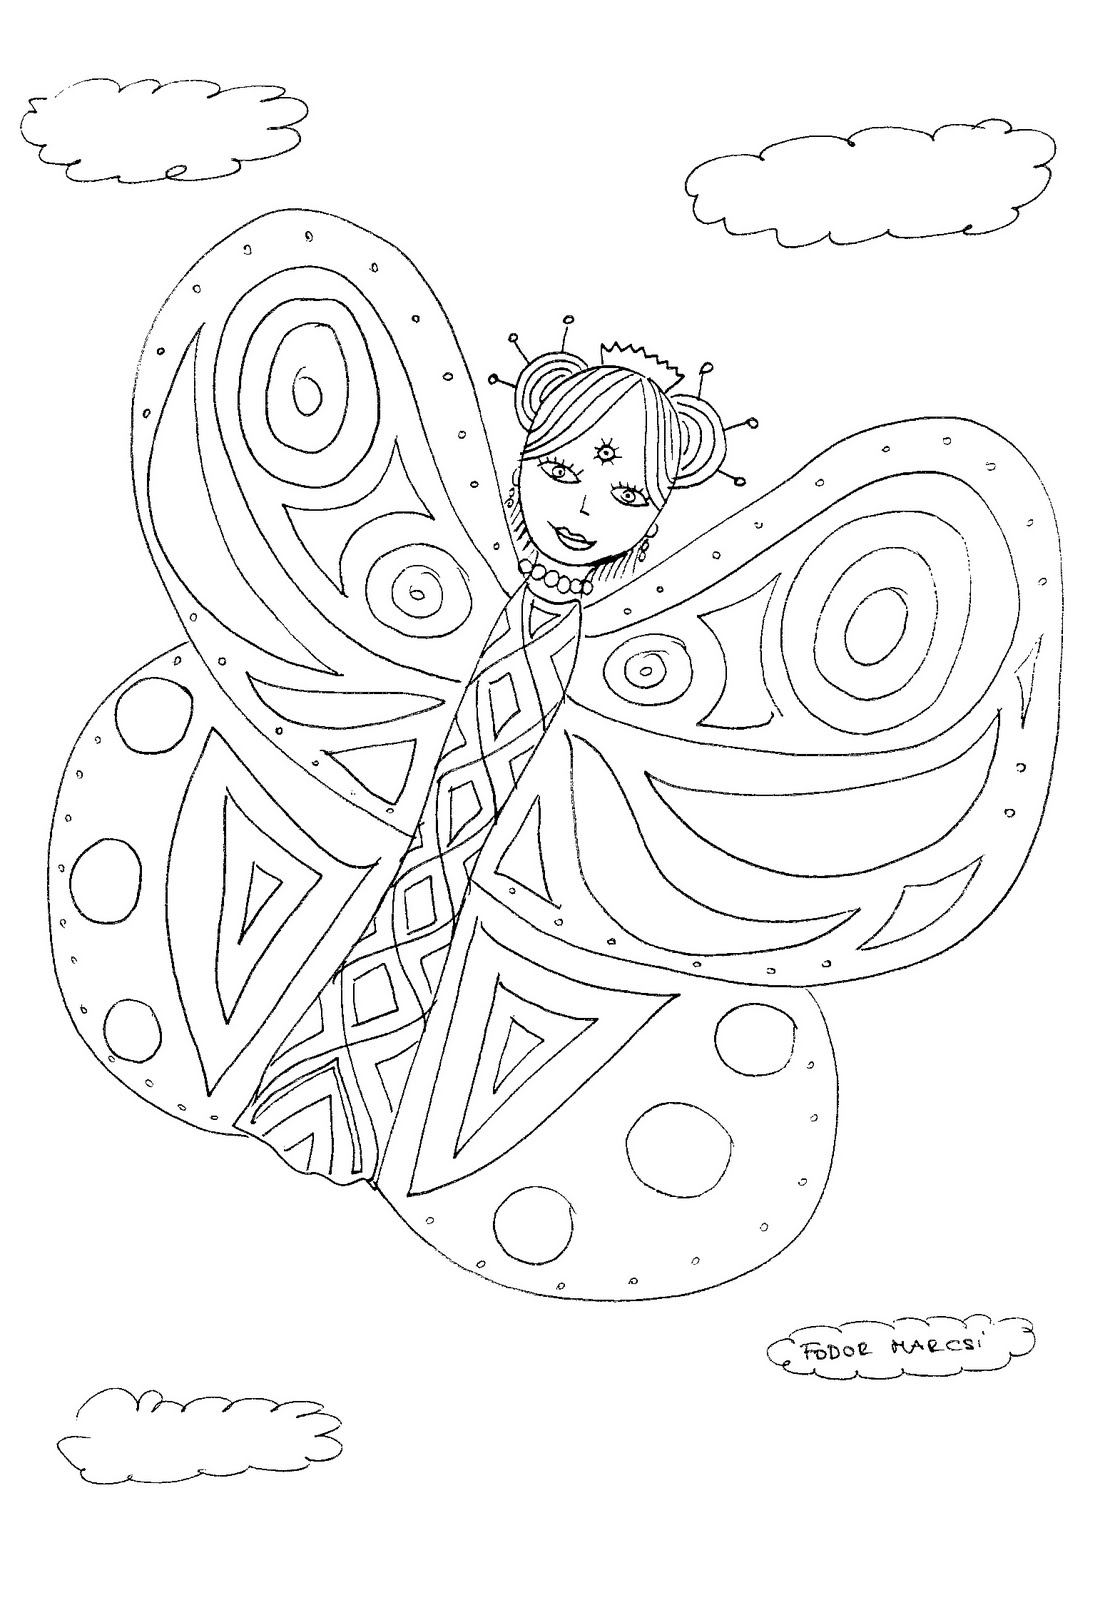 Butterfly Princess | One Princess for Every Day